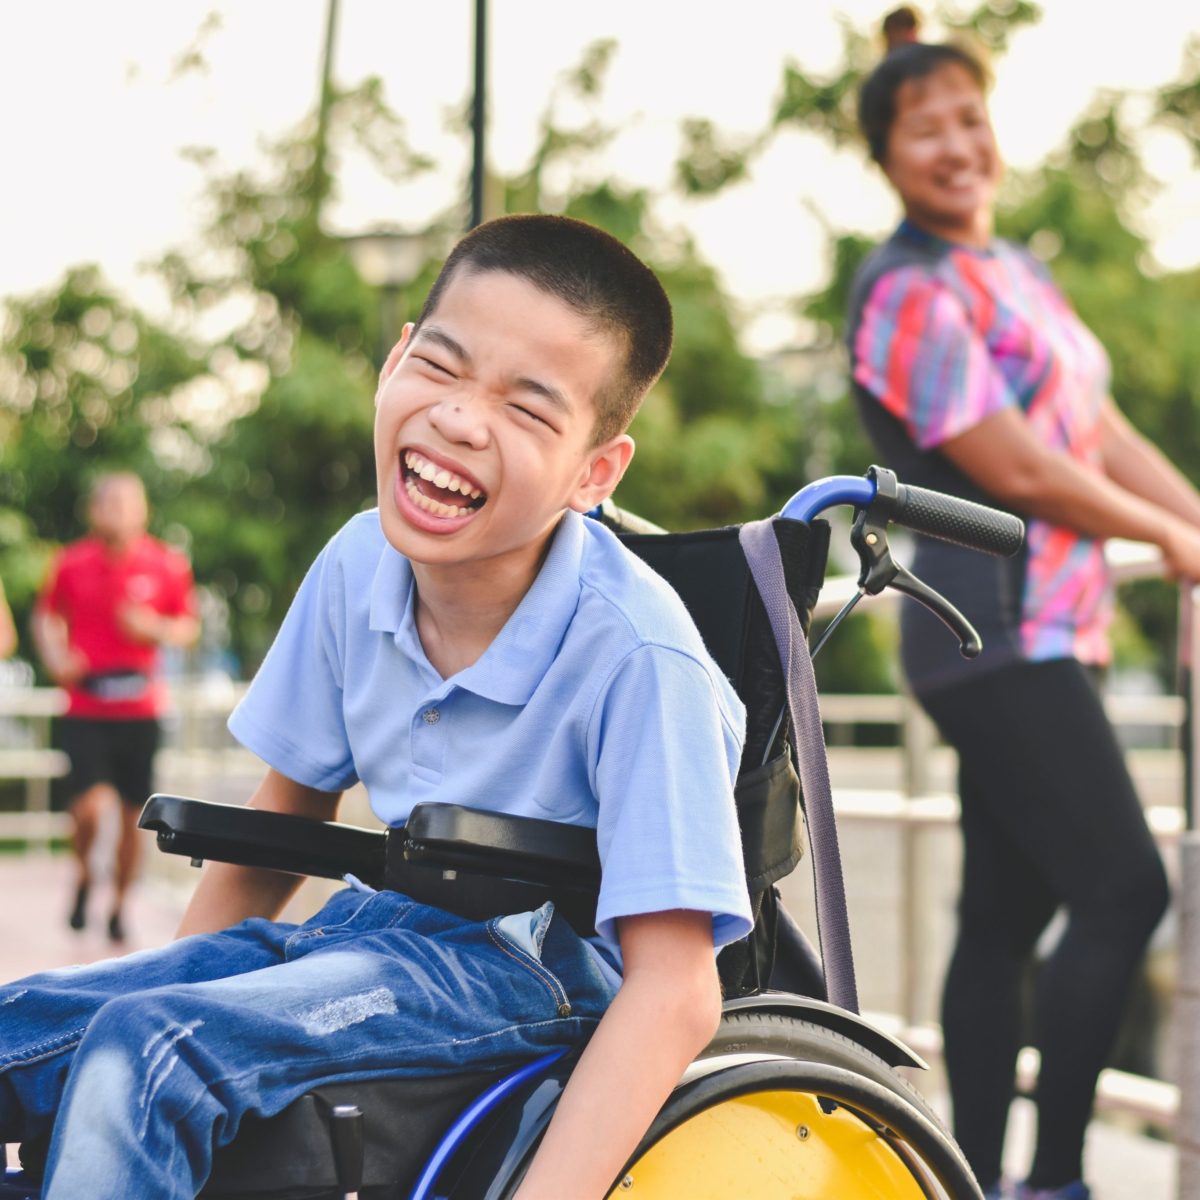 Young boy smiling in wheel chair